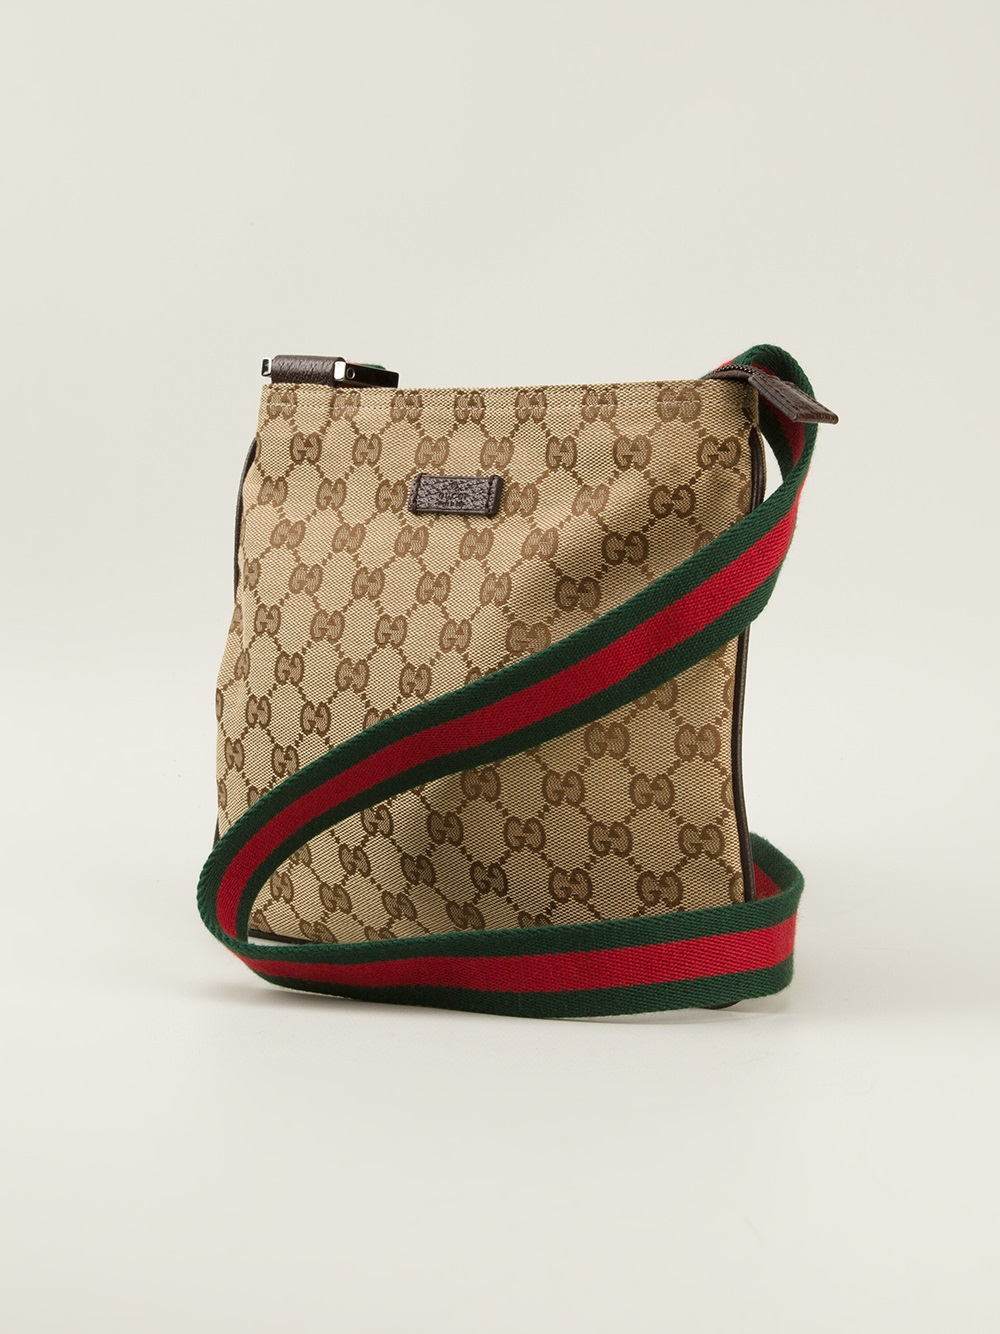 Lyst - Gucci 'Messenger' Cross Body Bag in Brown